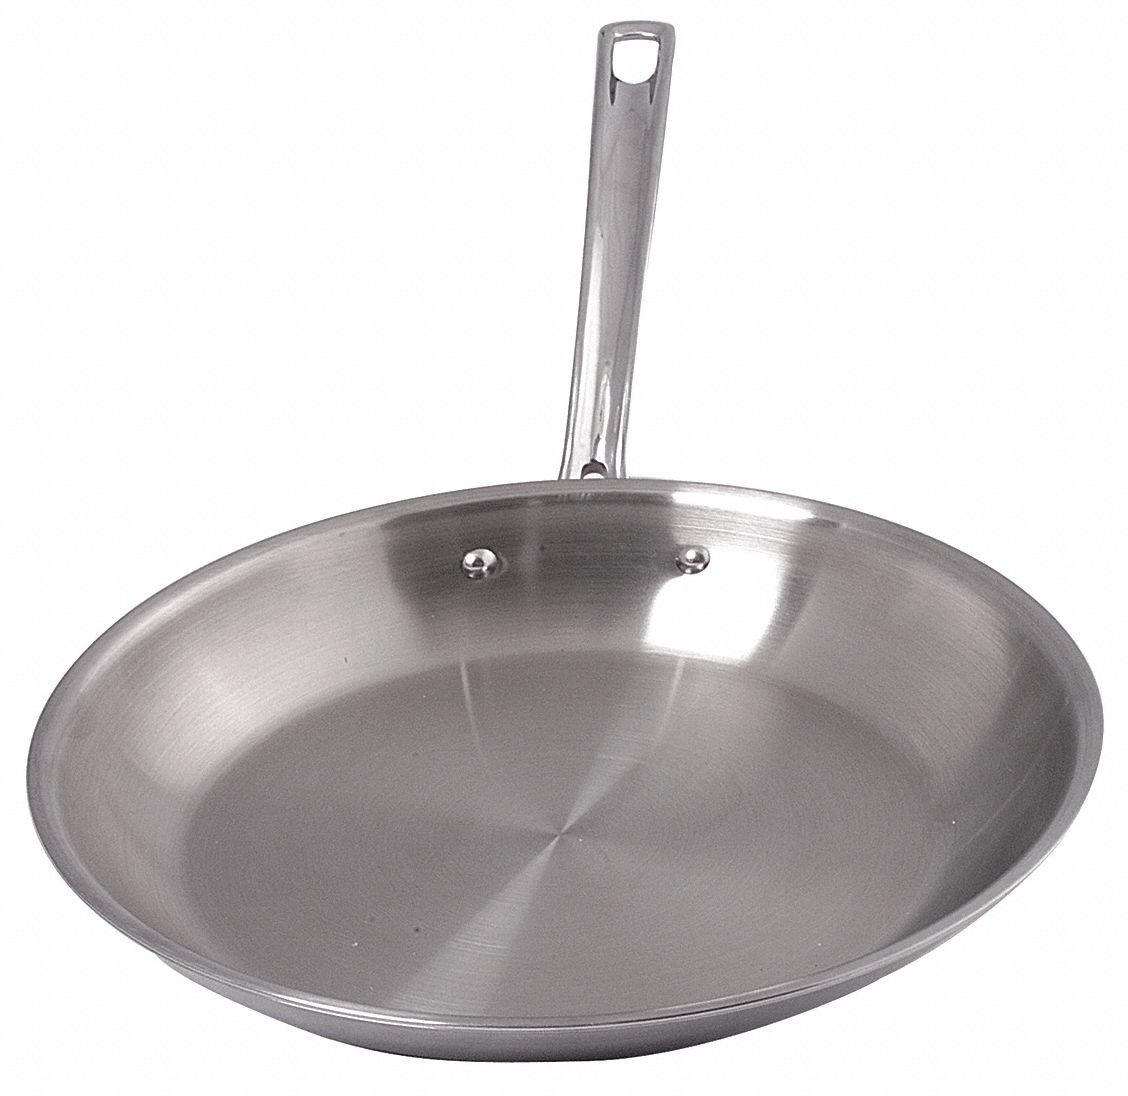 Fry Pan: 1 qt Capacity, 14 in Overall Lg, 8 in Overall Wd, 1 1/2 in Overall Ht